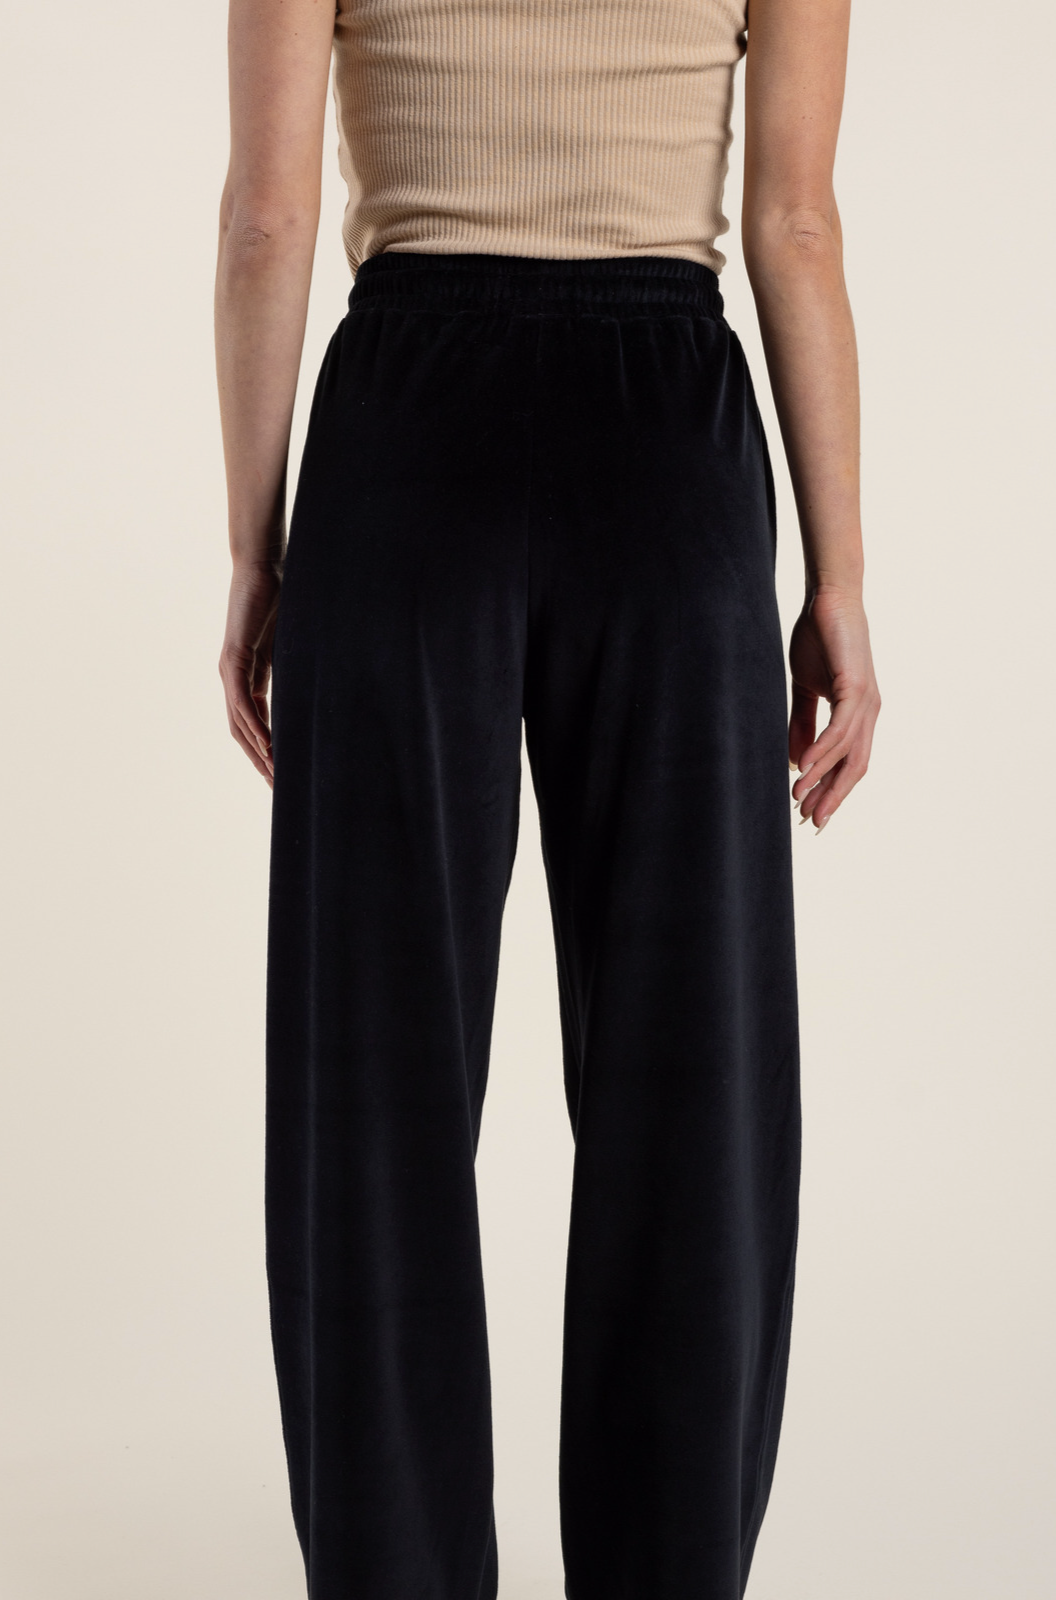 Two-T's Clothing Velour Pants in Black - Urban Cachet